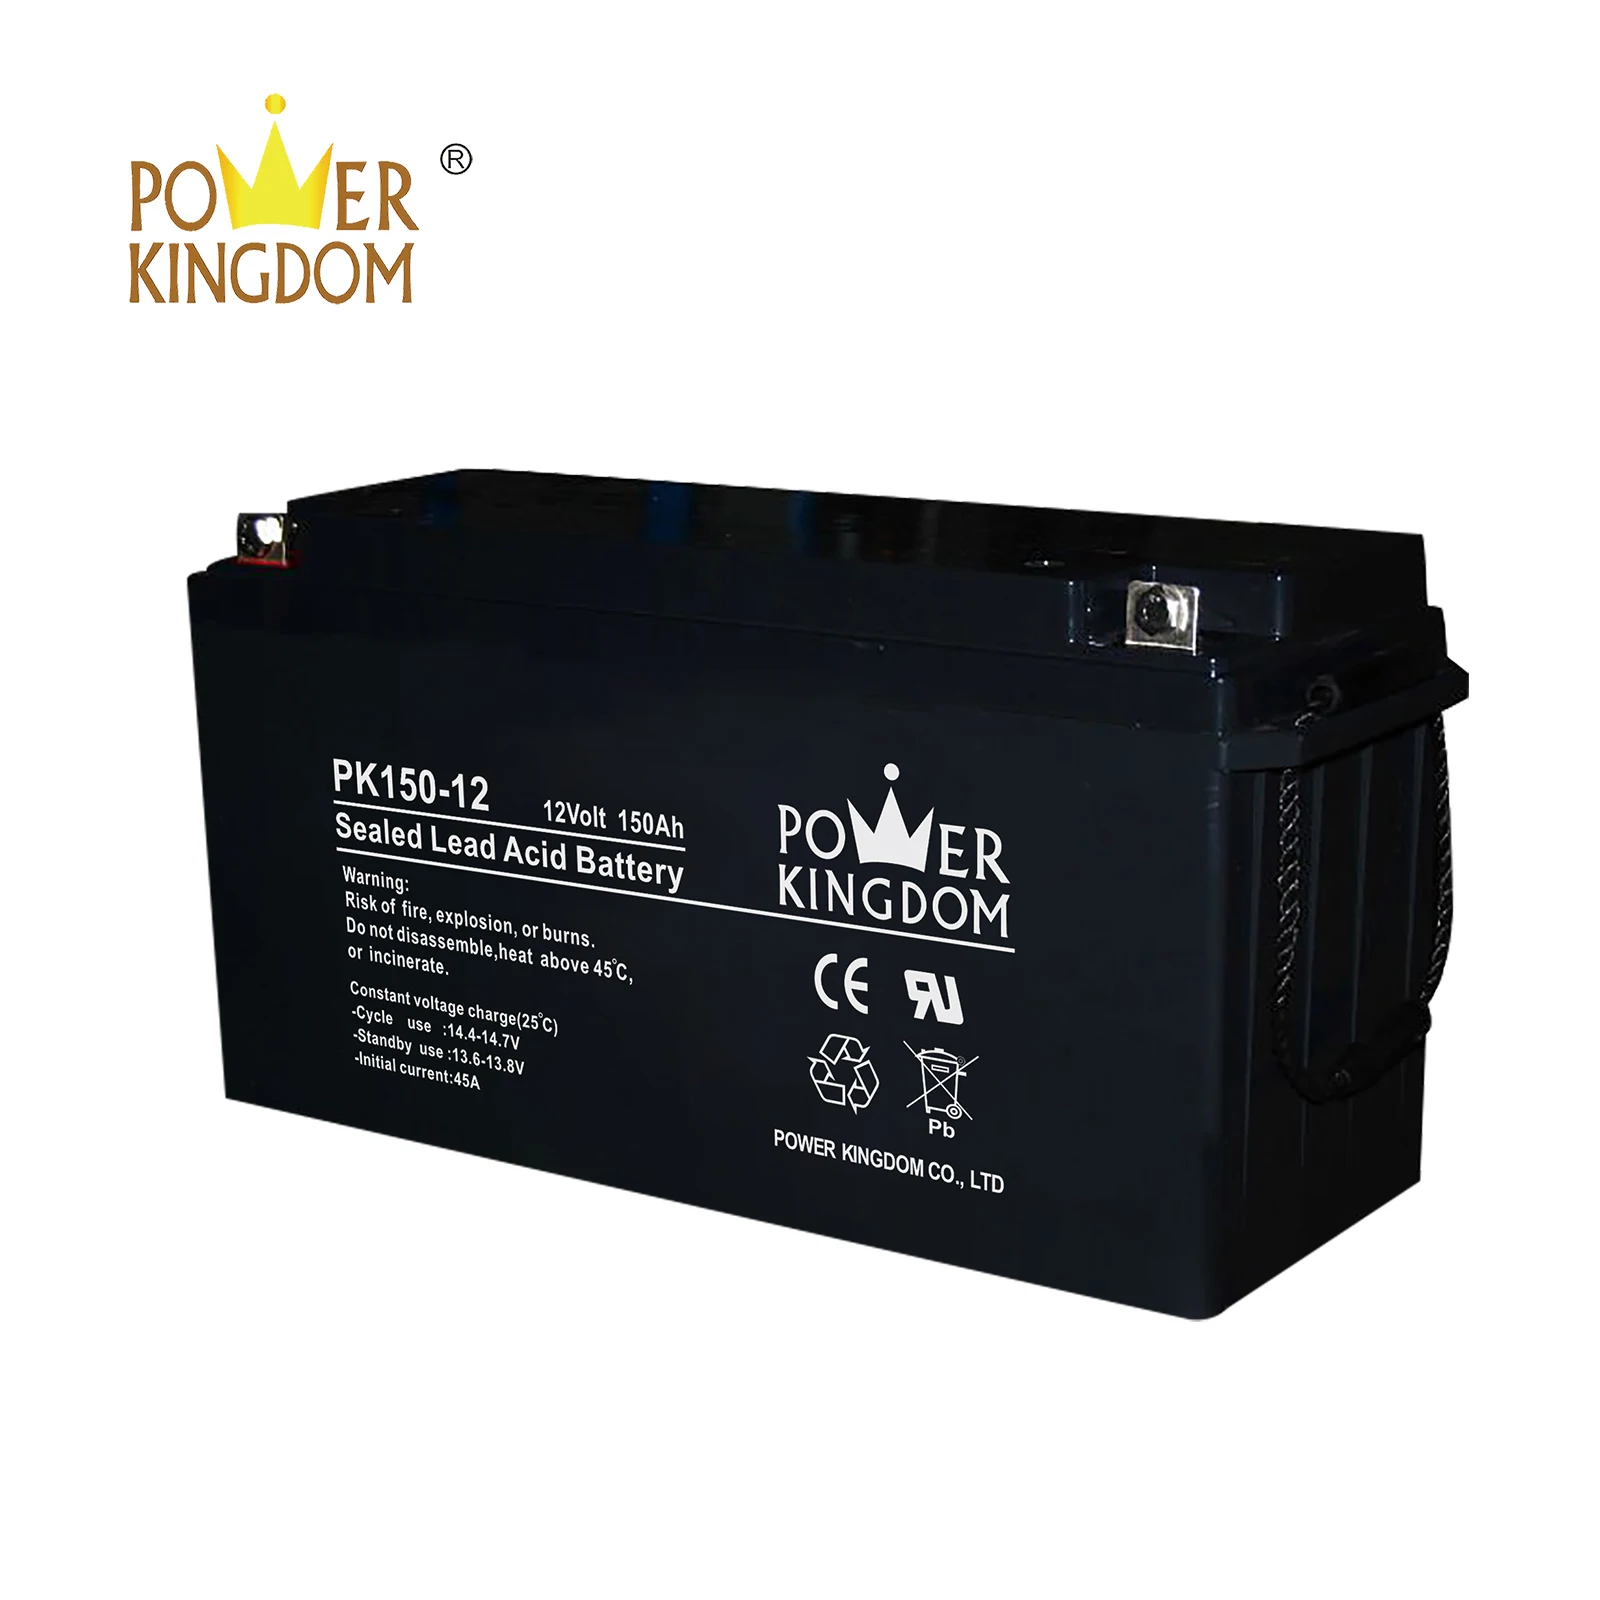 Power Kingdom gel cell deep cycle battery order now solar and wind power system